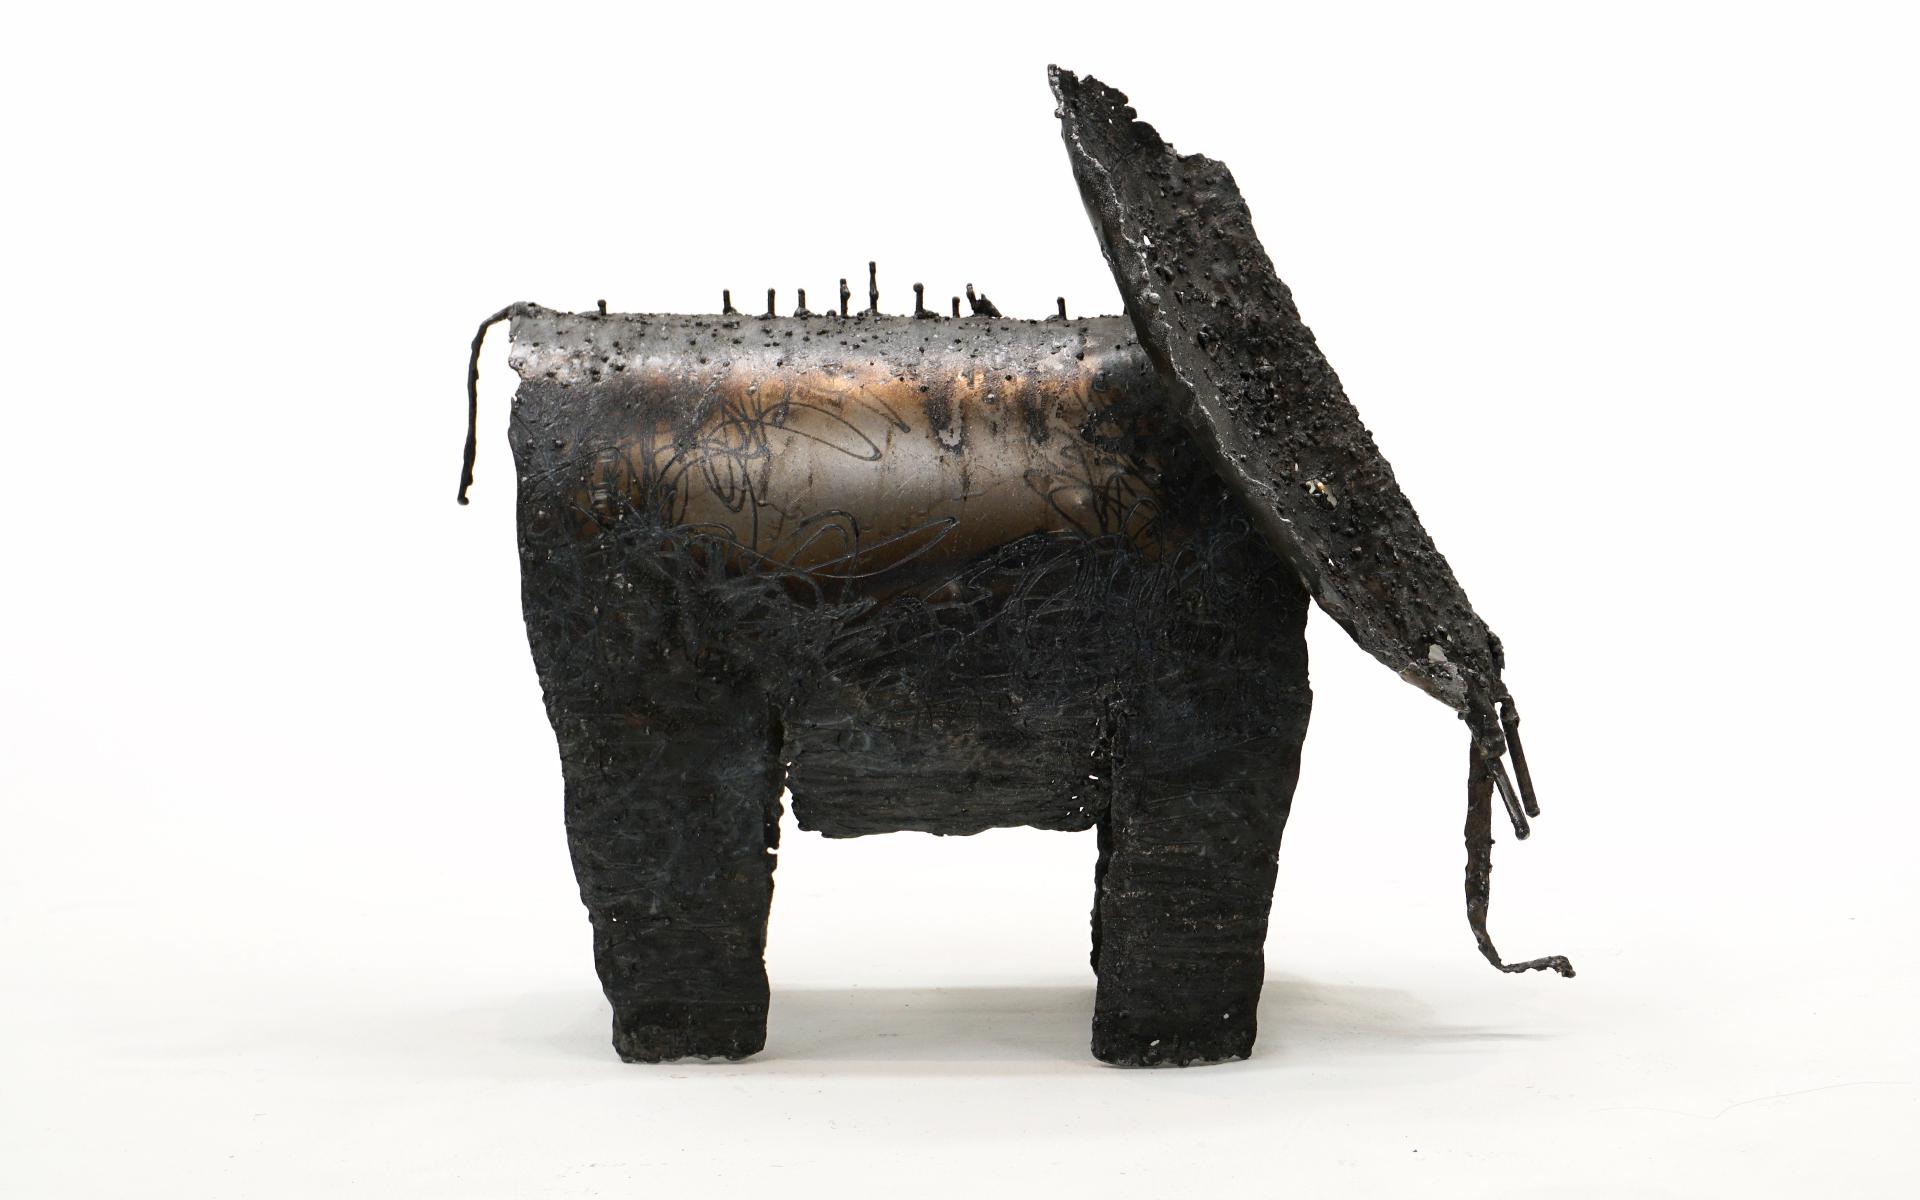 Torch Cut Steel Elephant Table Top Sculpture by James Bearden In Excellent Condition For Sale In Kansas City, MO